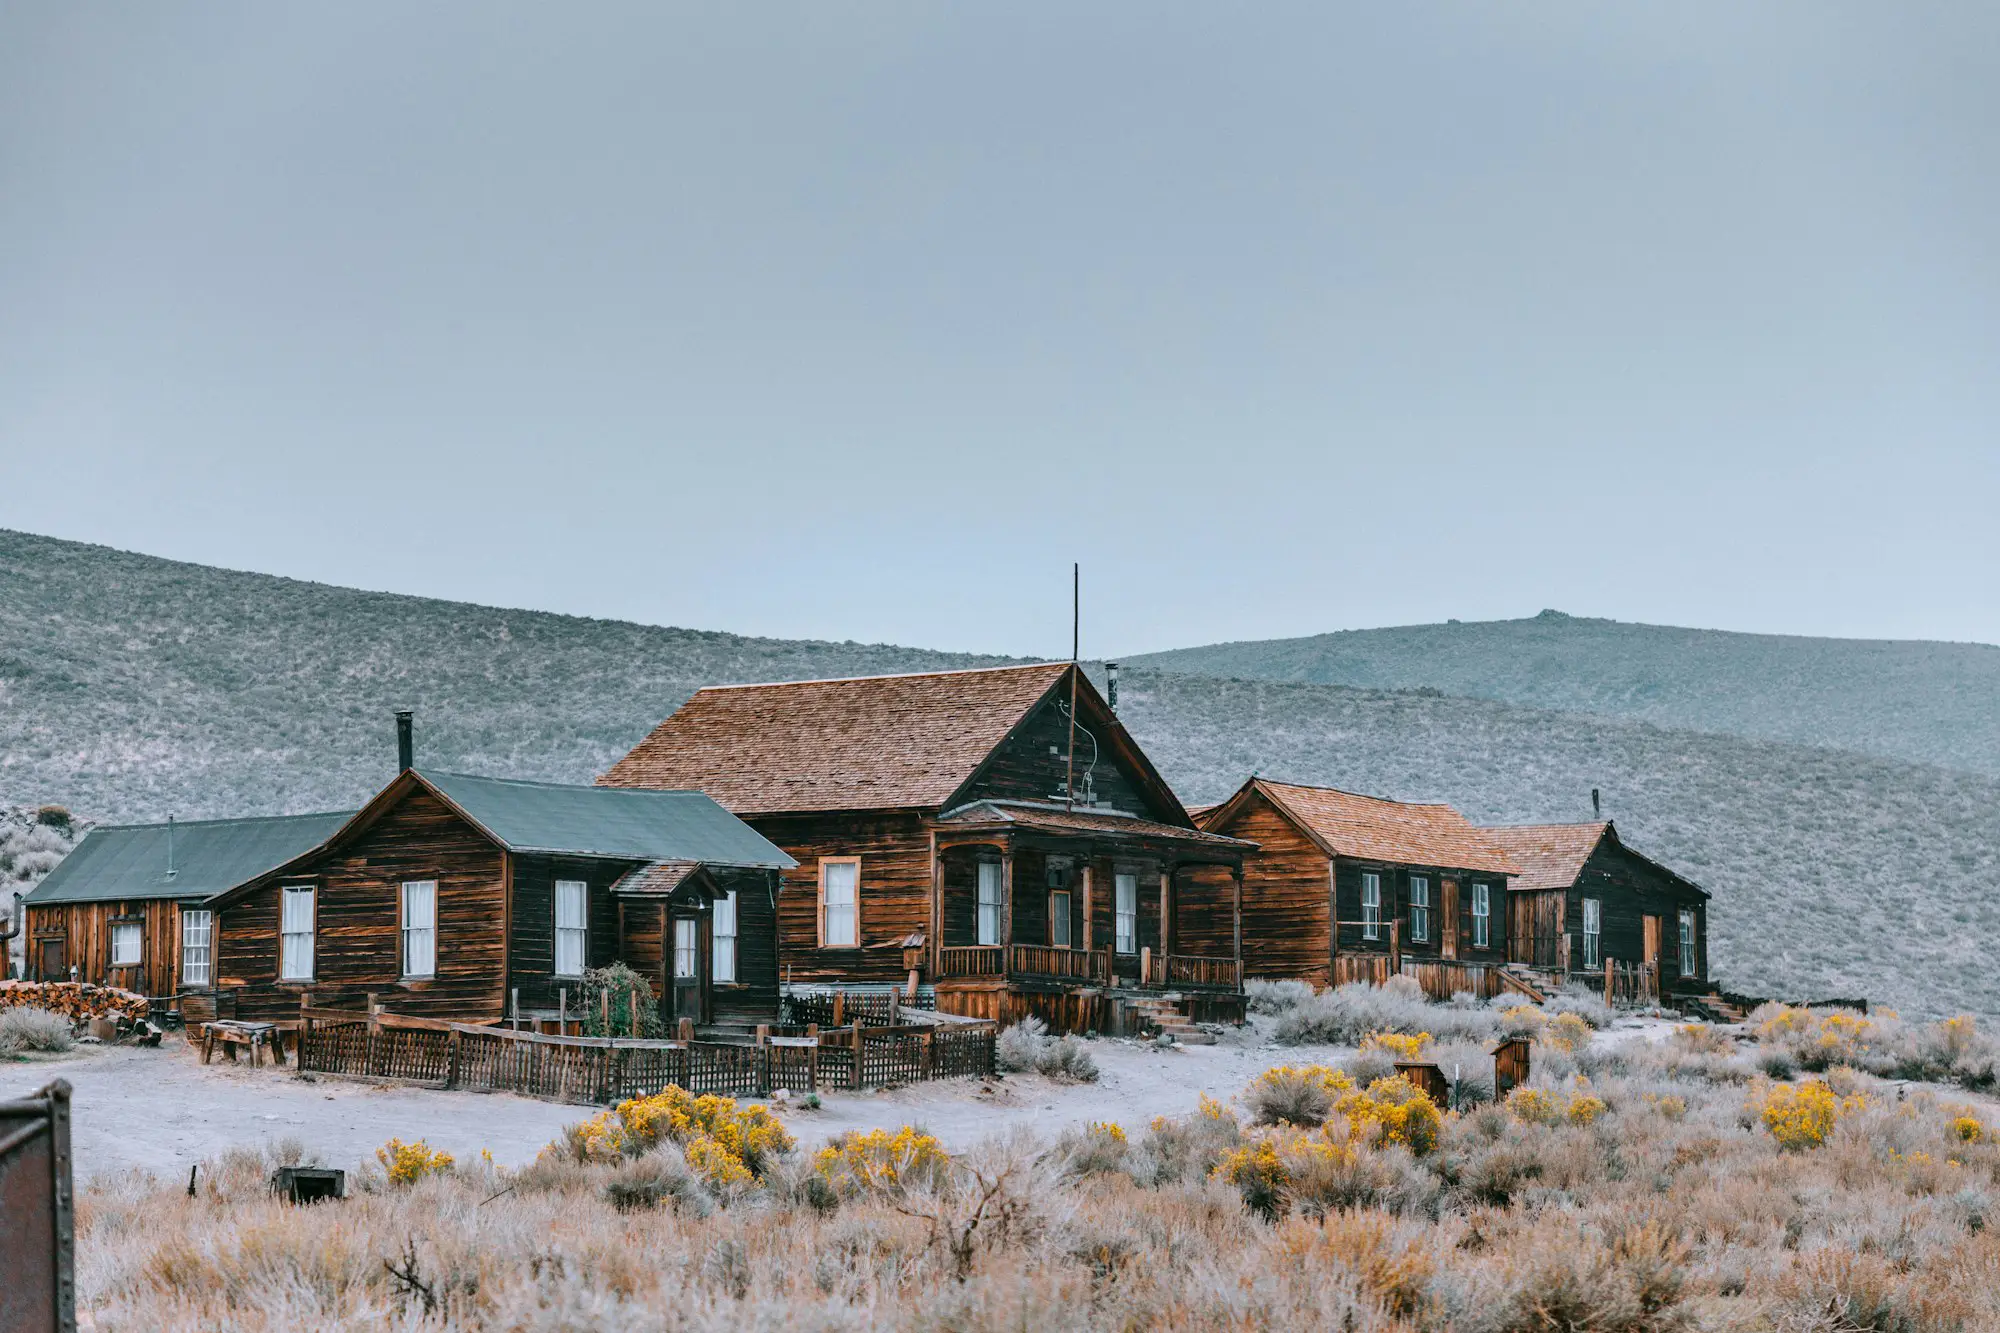 Road trip from California to Utah through Bodie State Historic Park